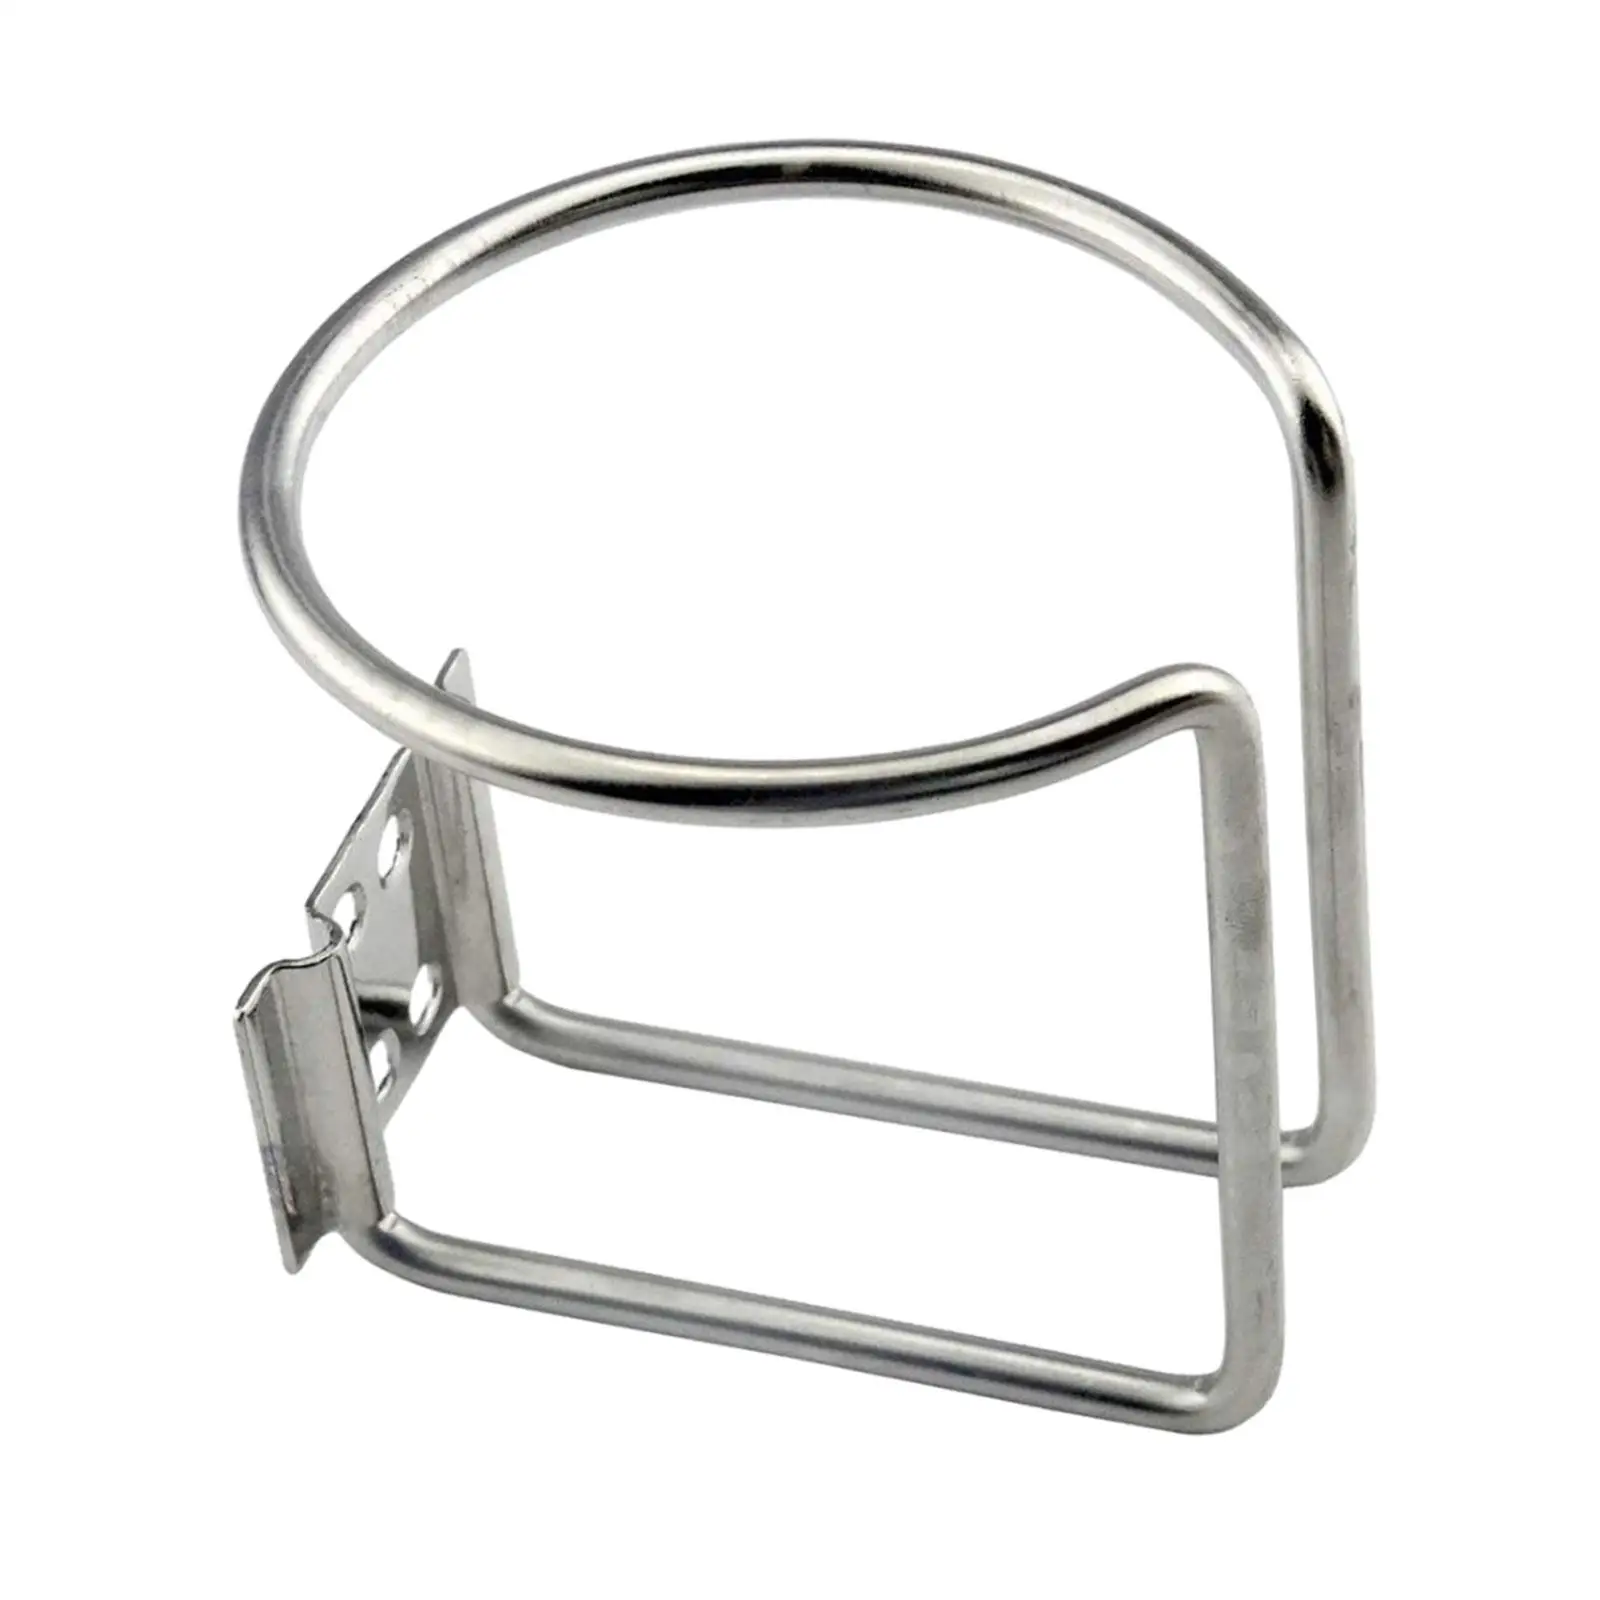 Drinks Holders Stainless Steel Boat Cup Holder for Truck Marine Boat